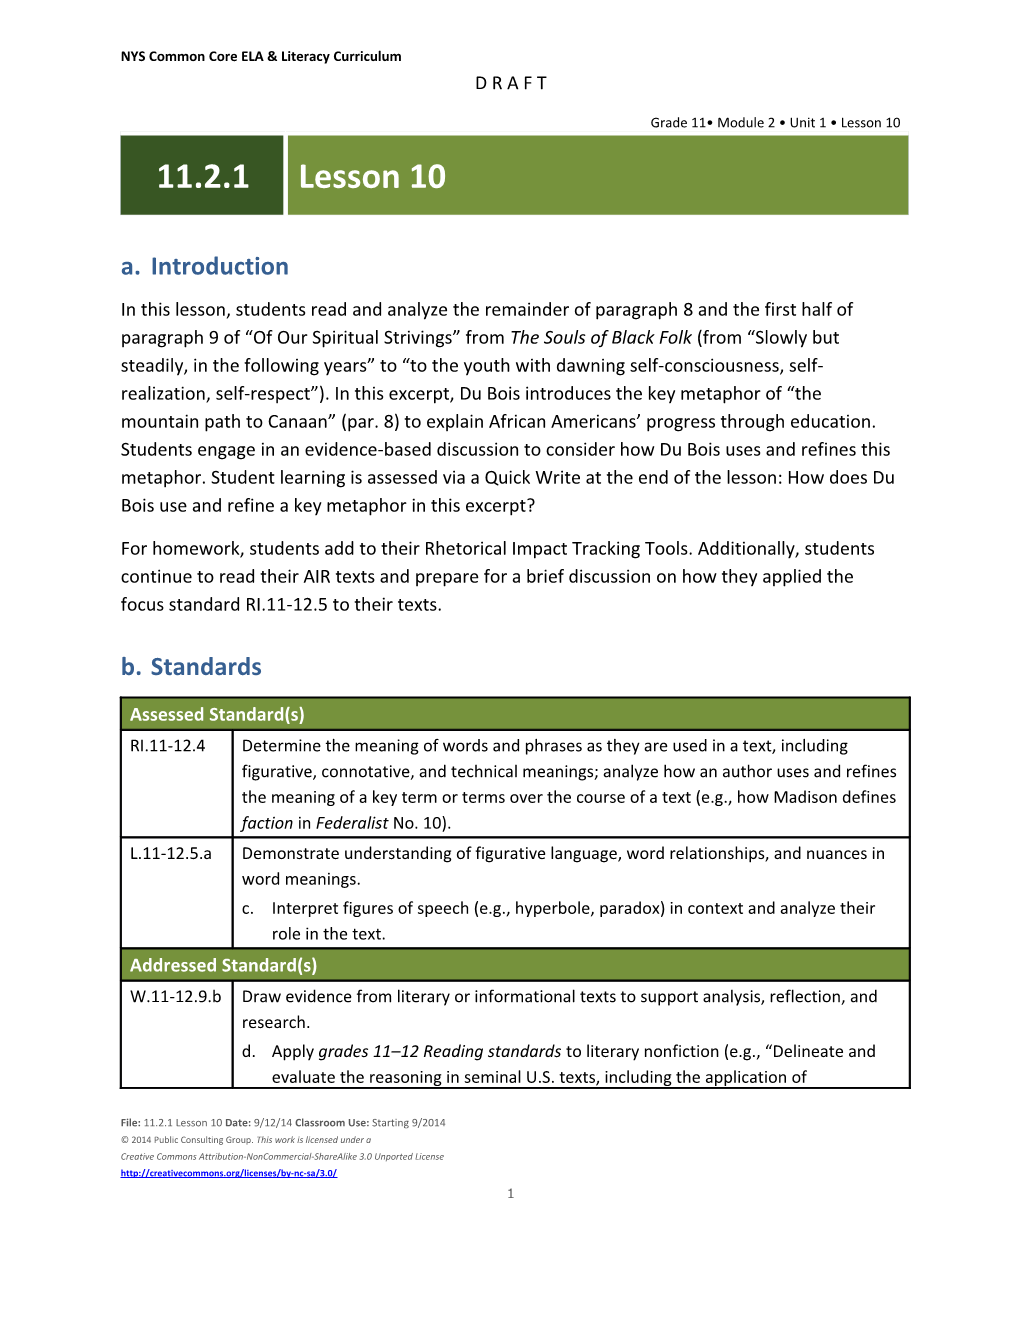 In This Lesson, Students Read and Analyze the Remainder of Paragraph 8 and the First Half